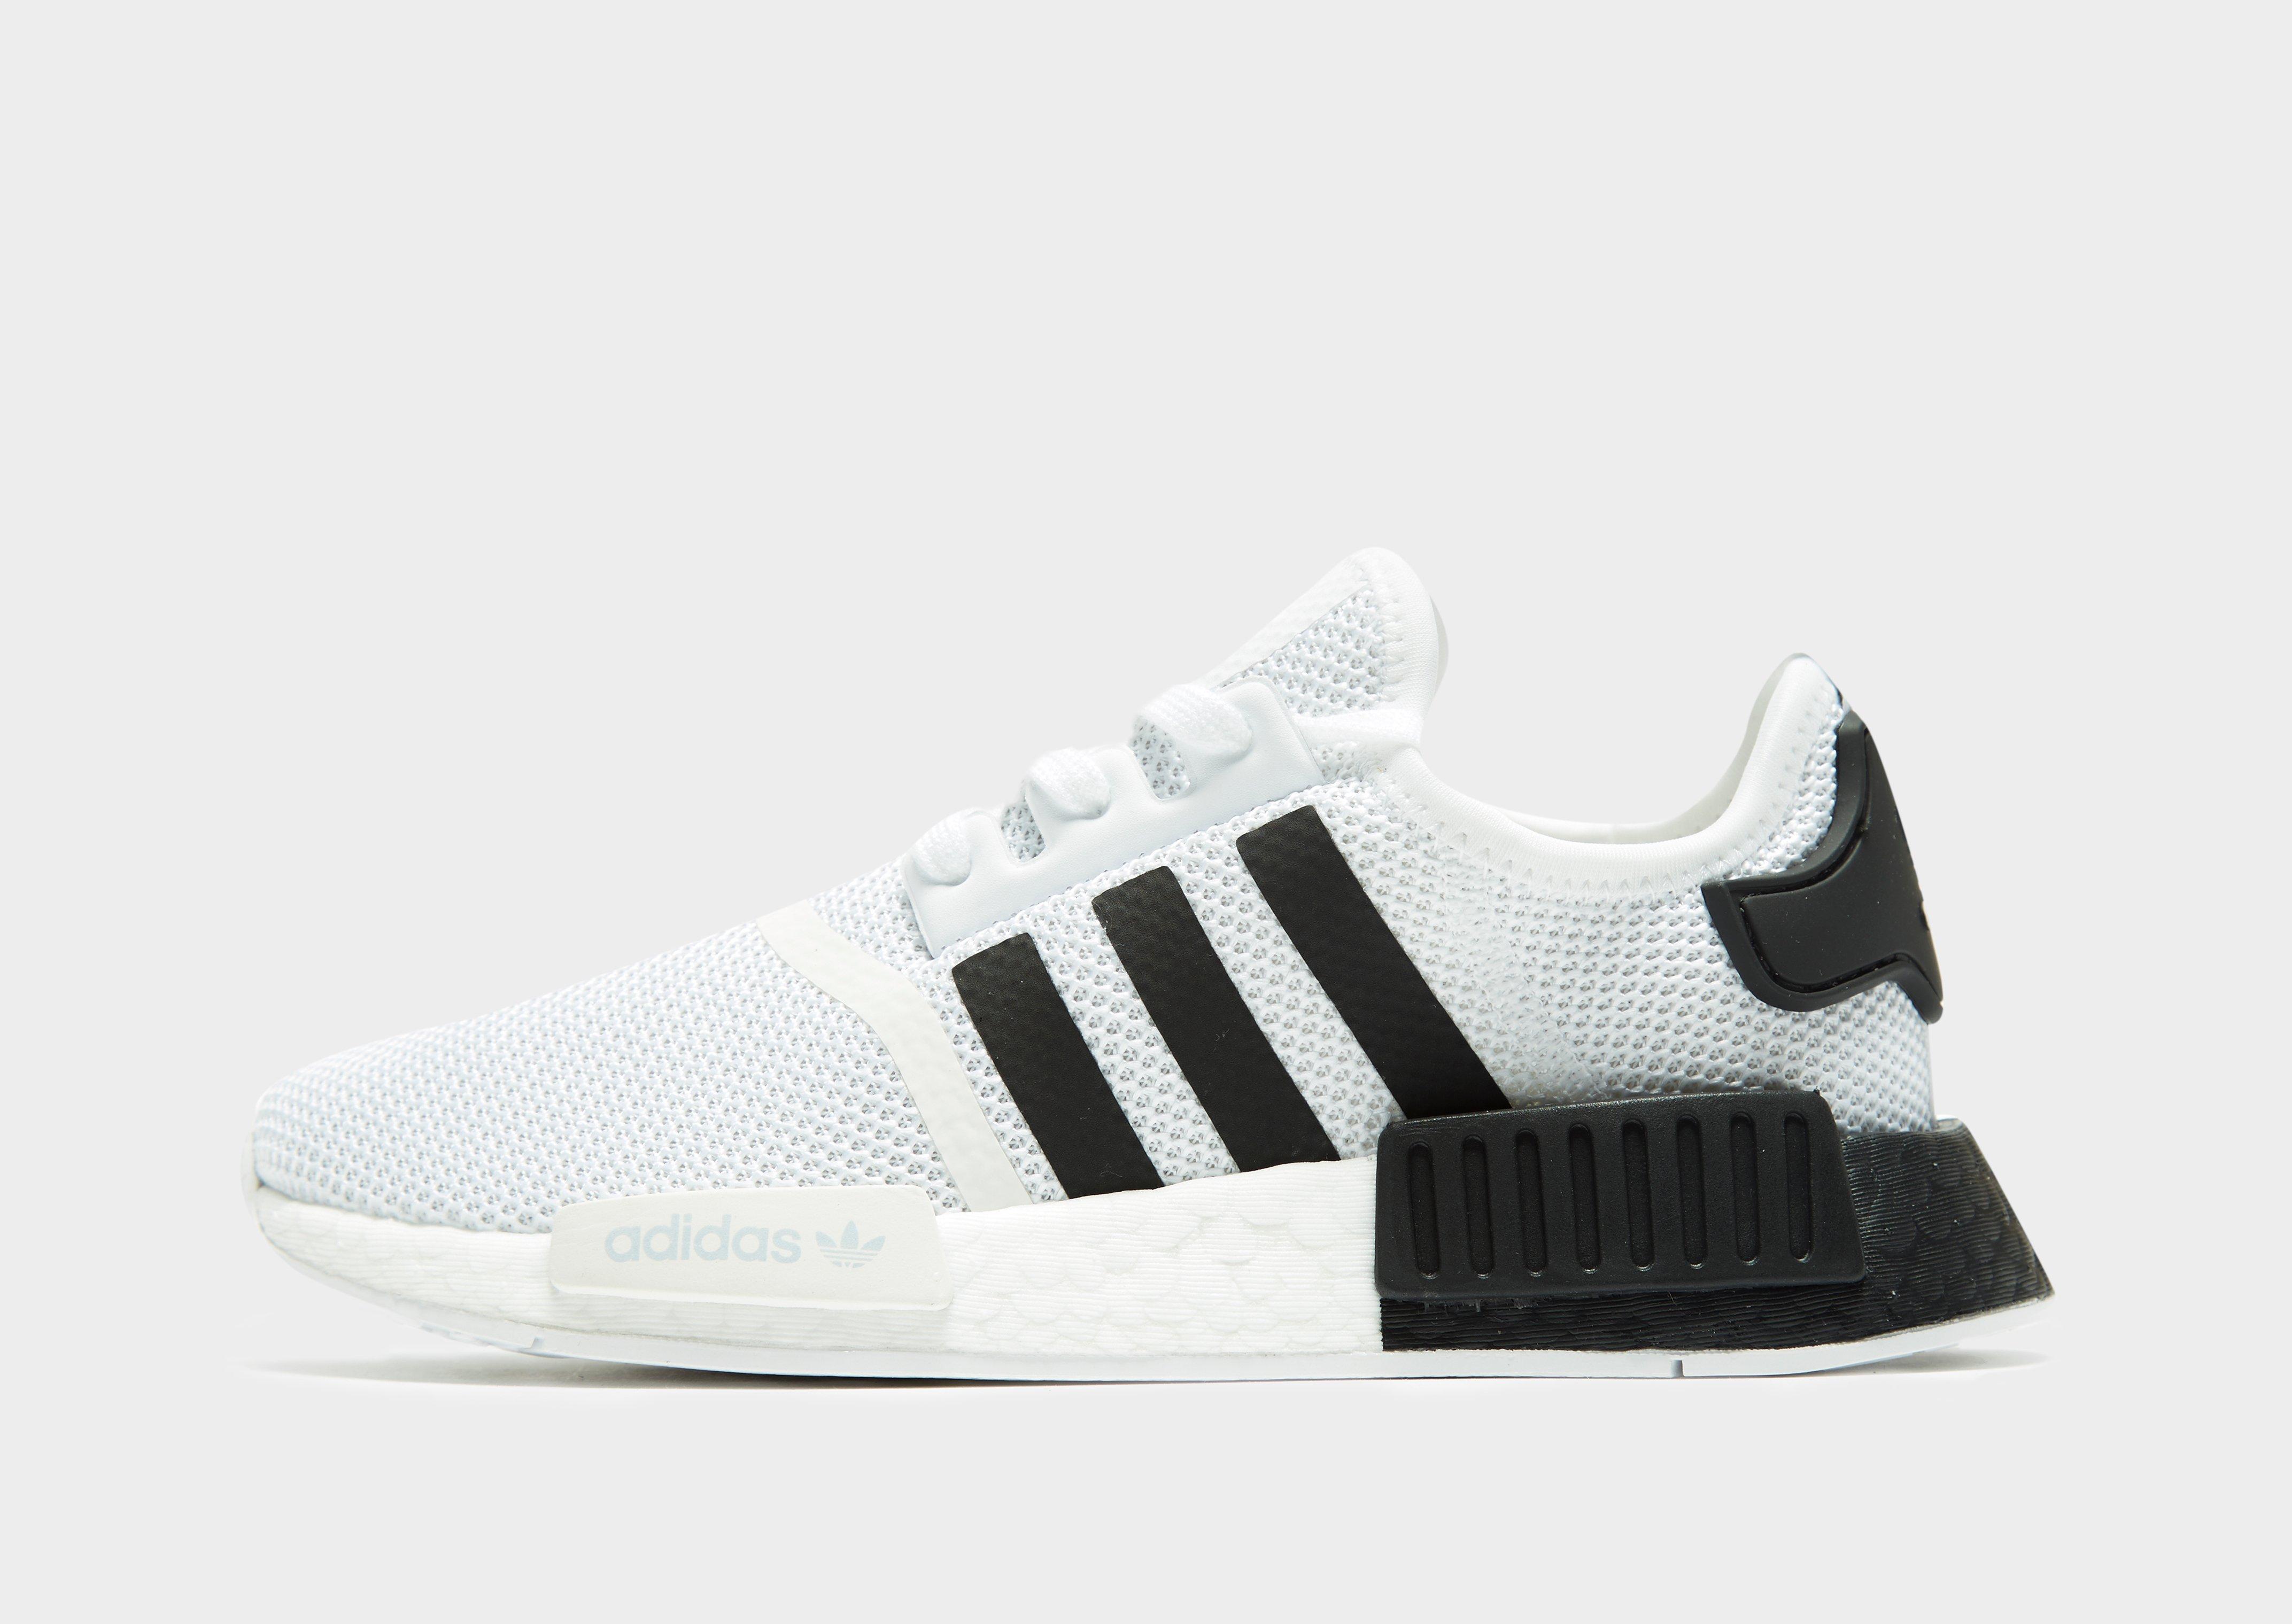 adidas NMD R1 White Reflective hypeanalyz is